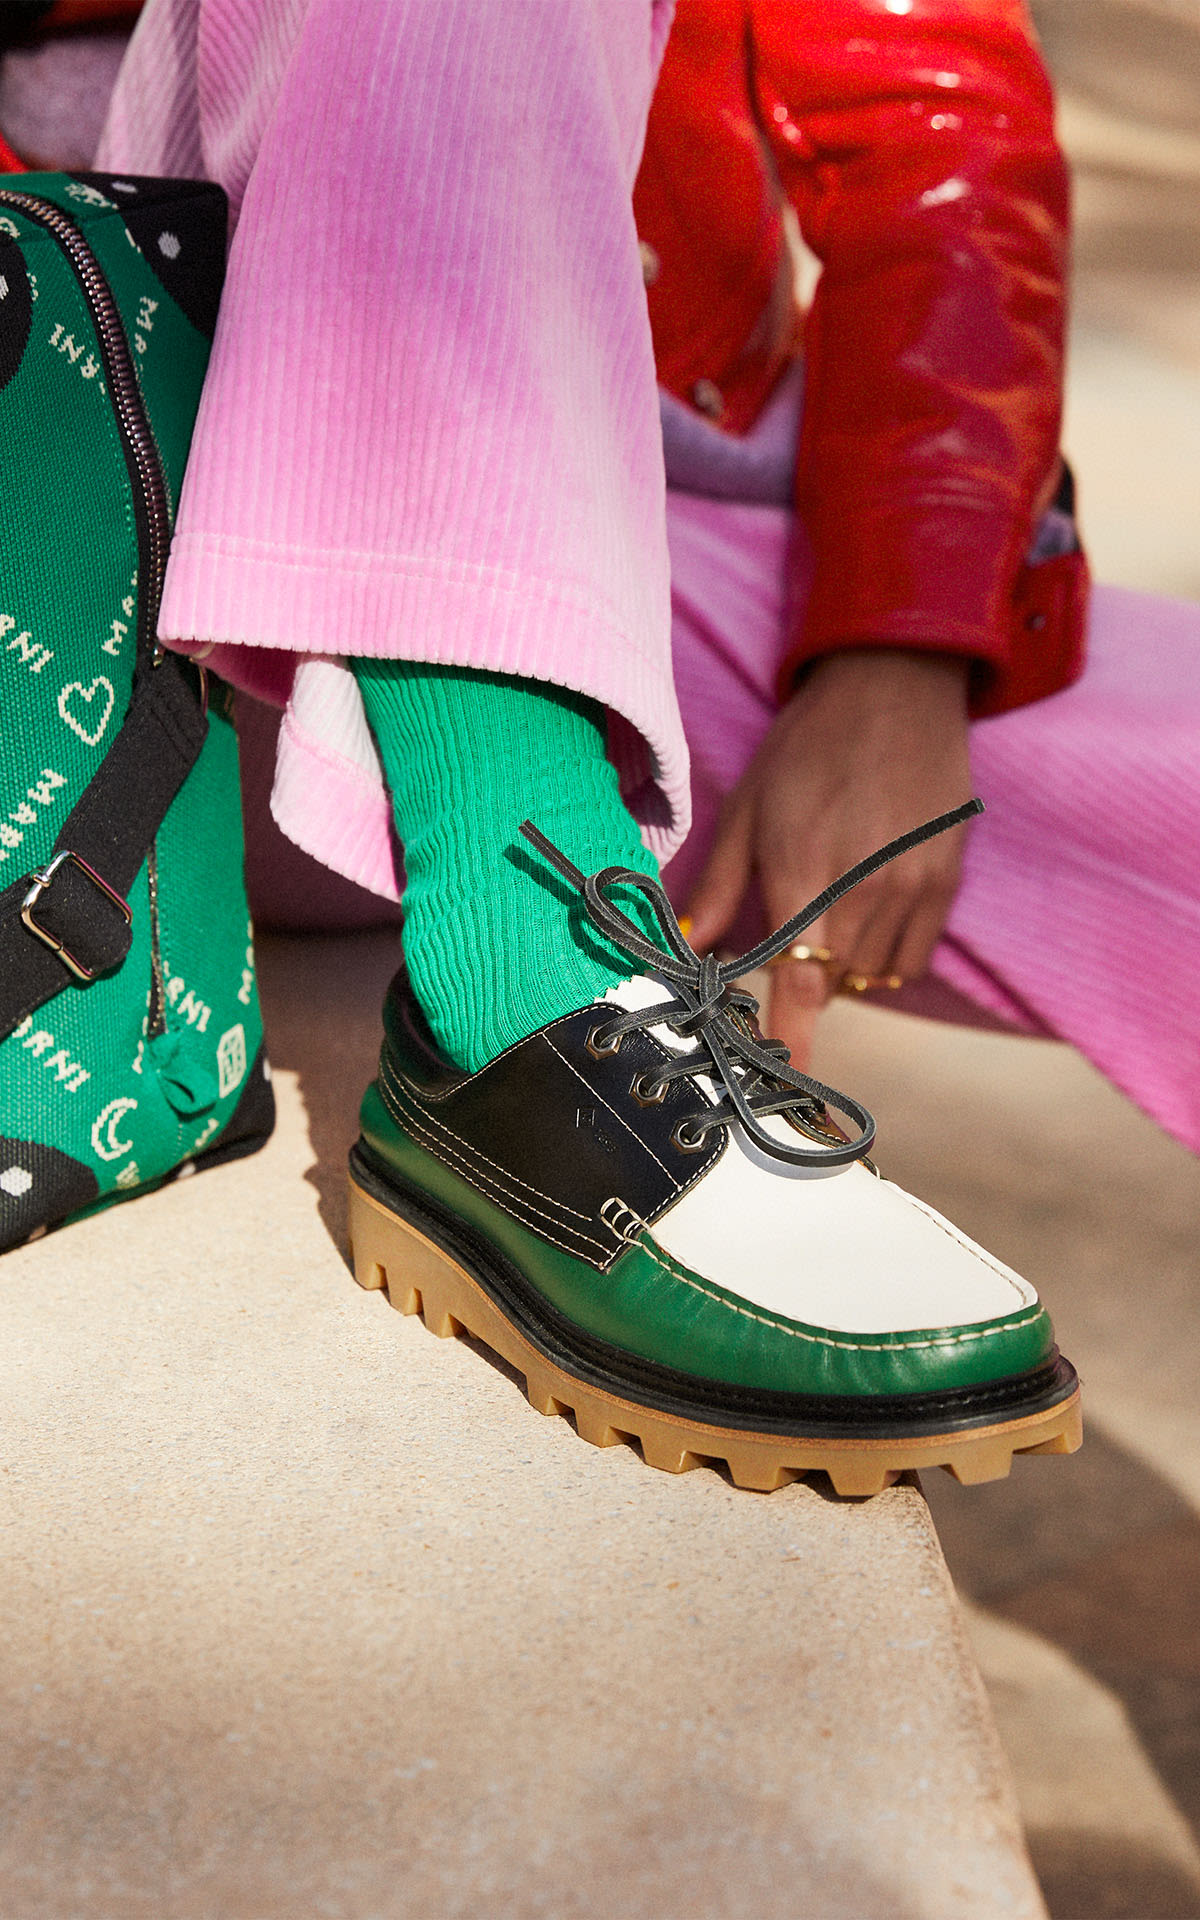 marni bag-green-lace-ups-and-pink-trousers